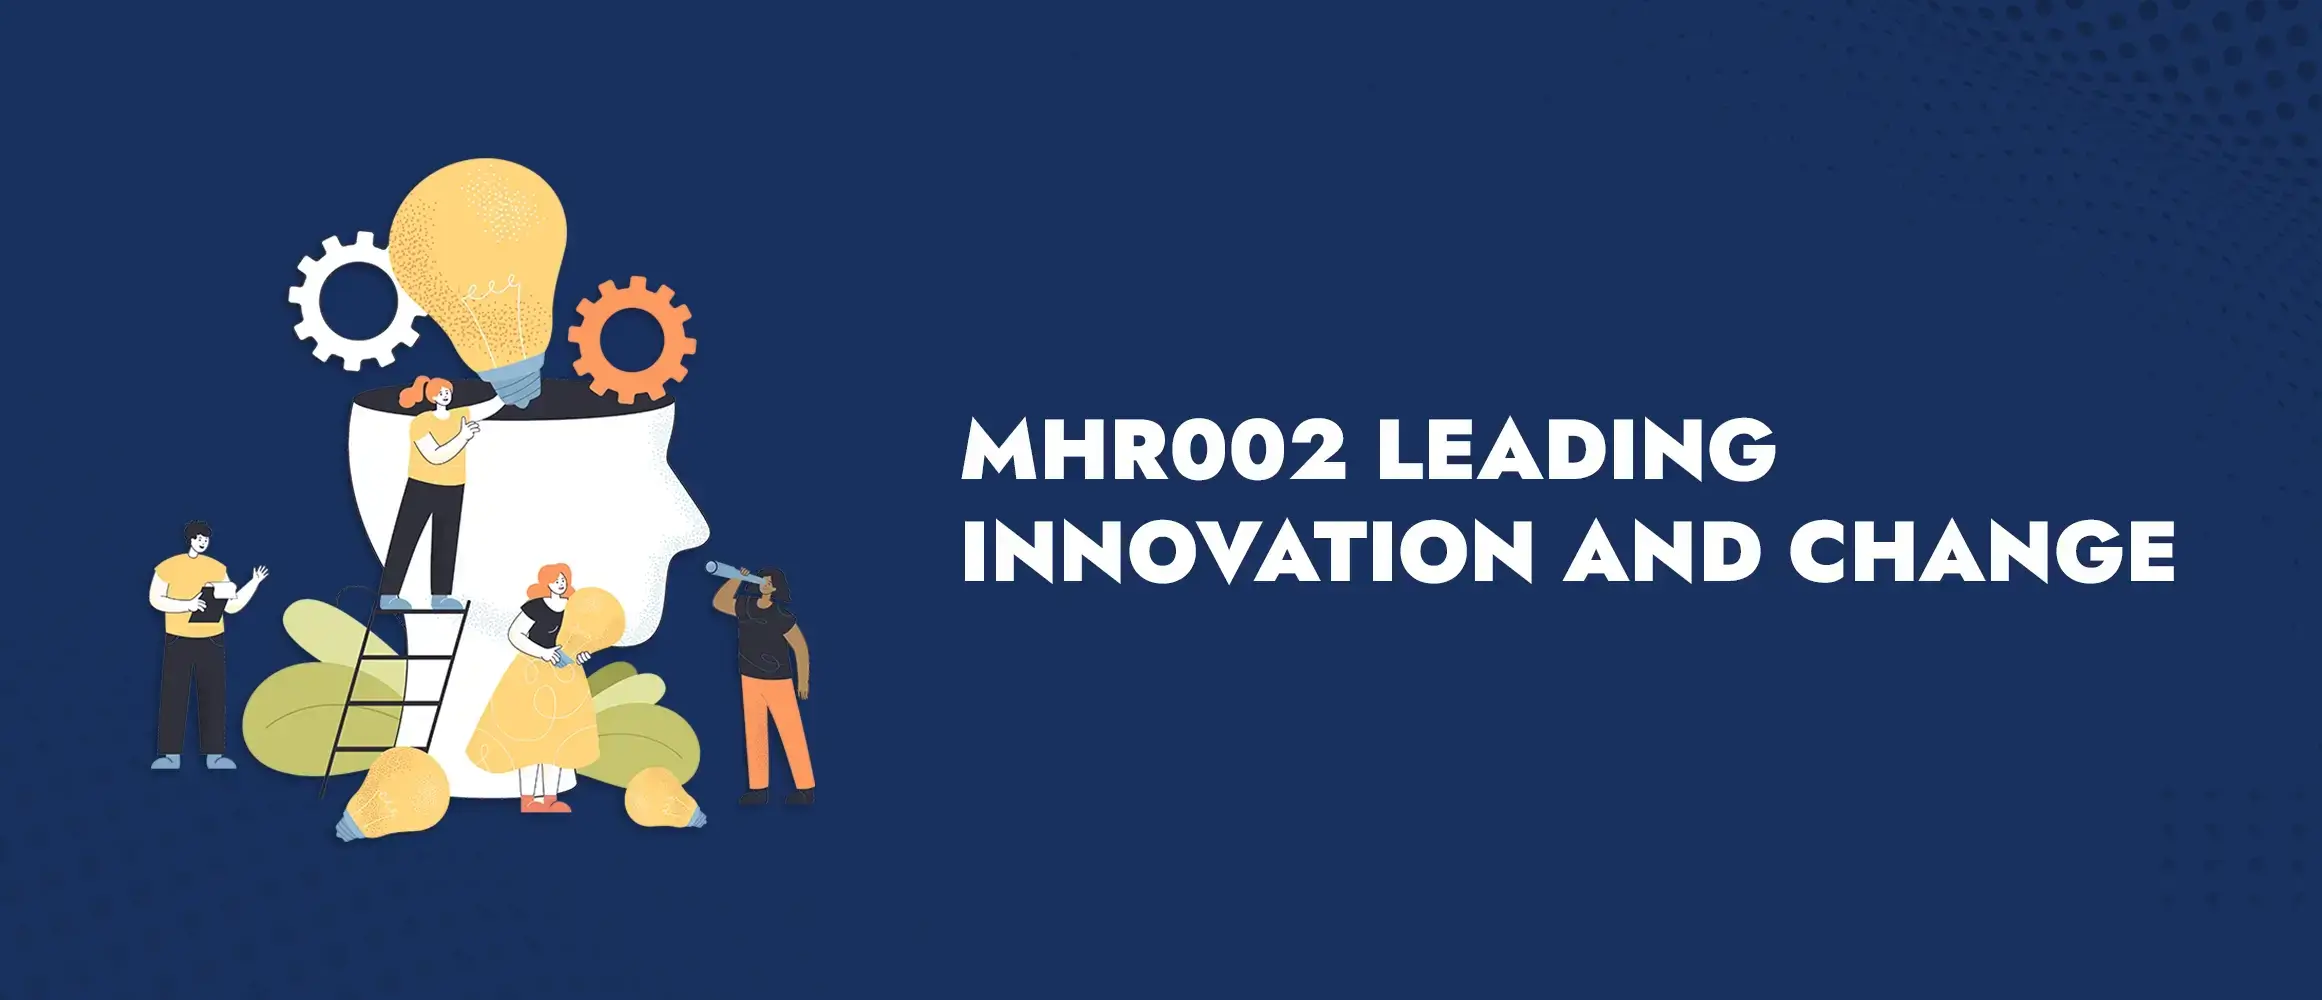 MHR002 Leading Innovation And Change